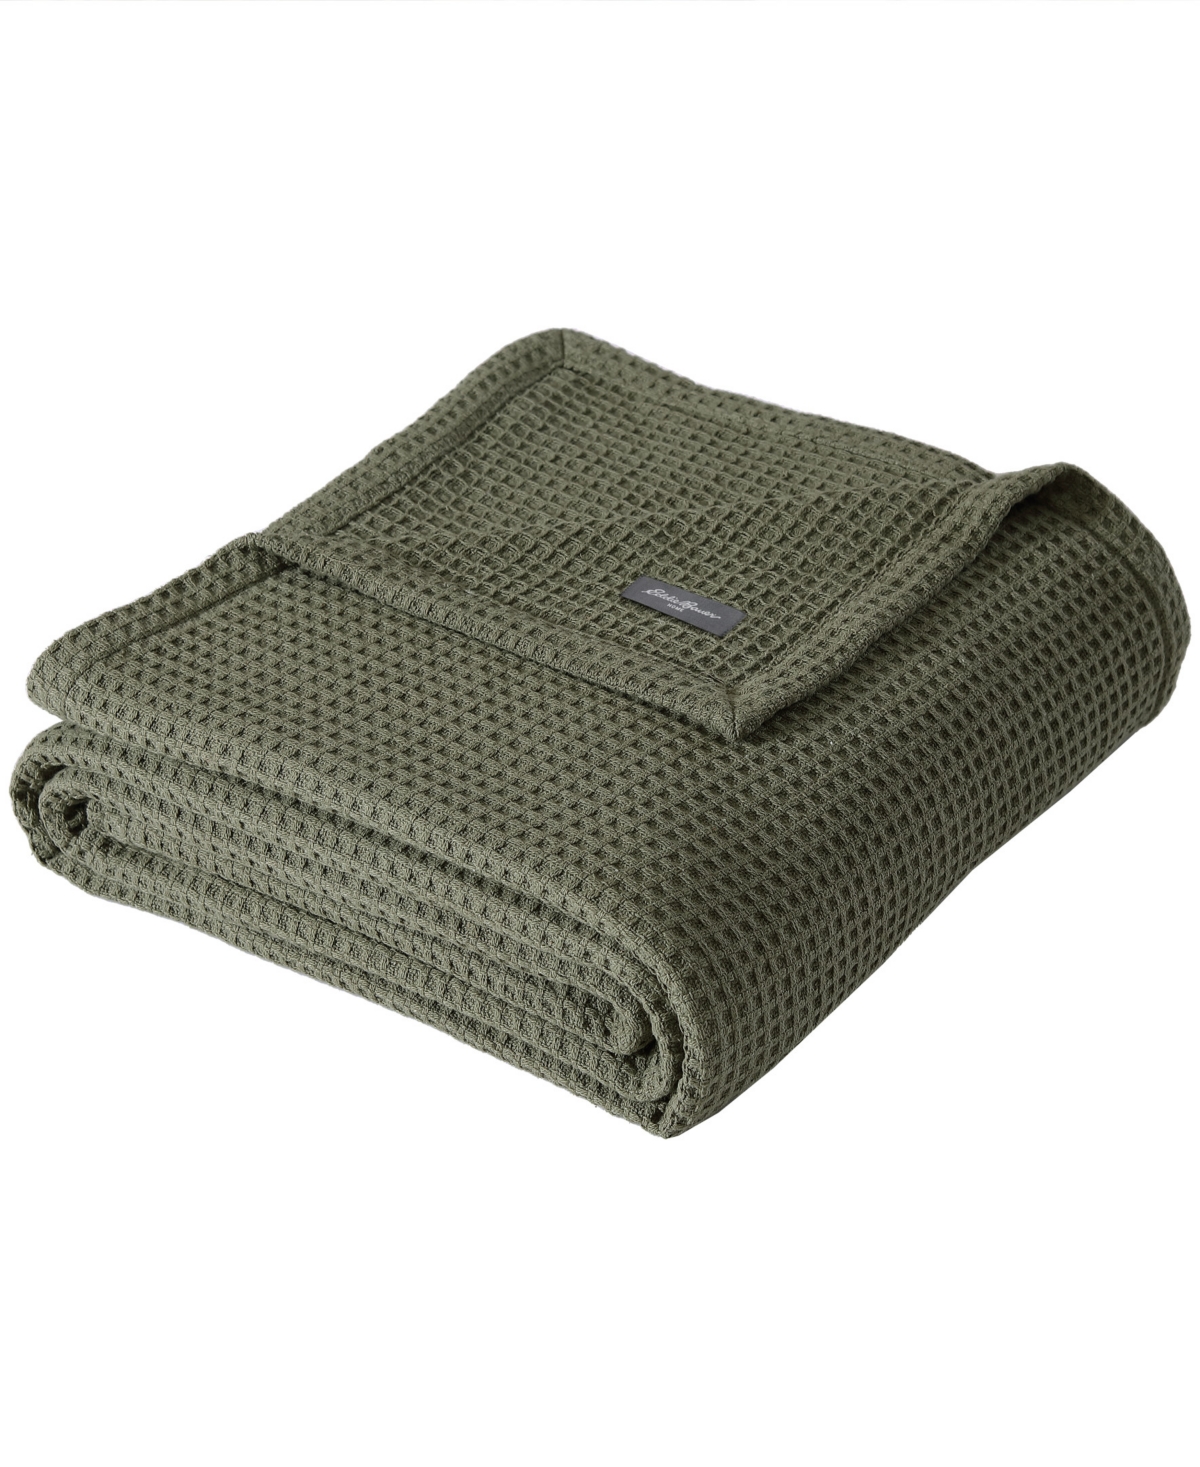 Eddie Bauer Solid Waffle Cotton Reversible Blanket, King In Olive Green